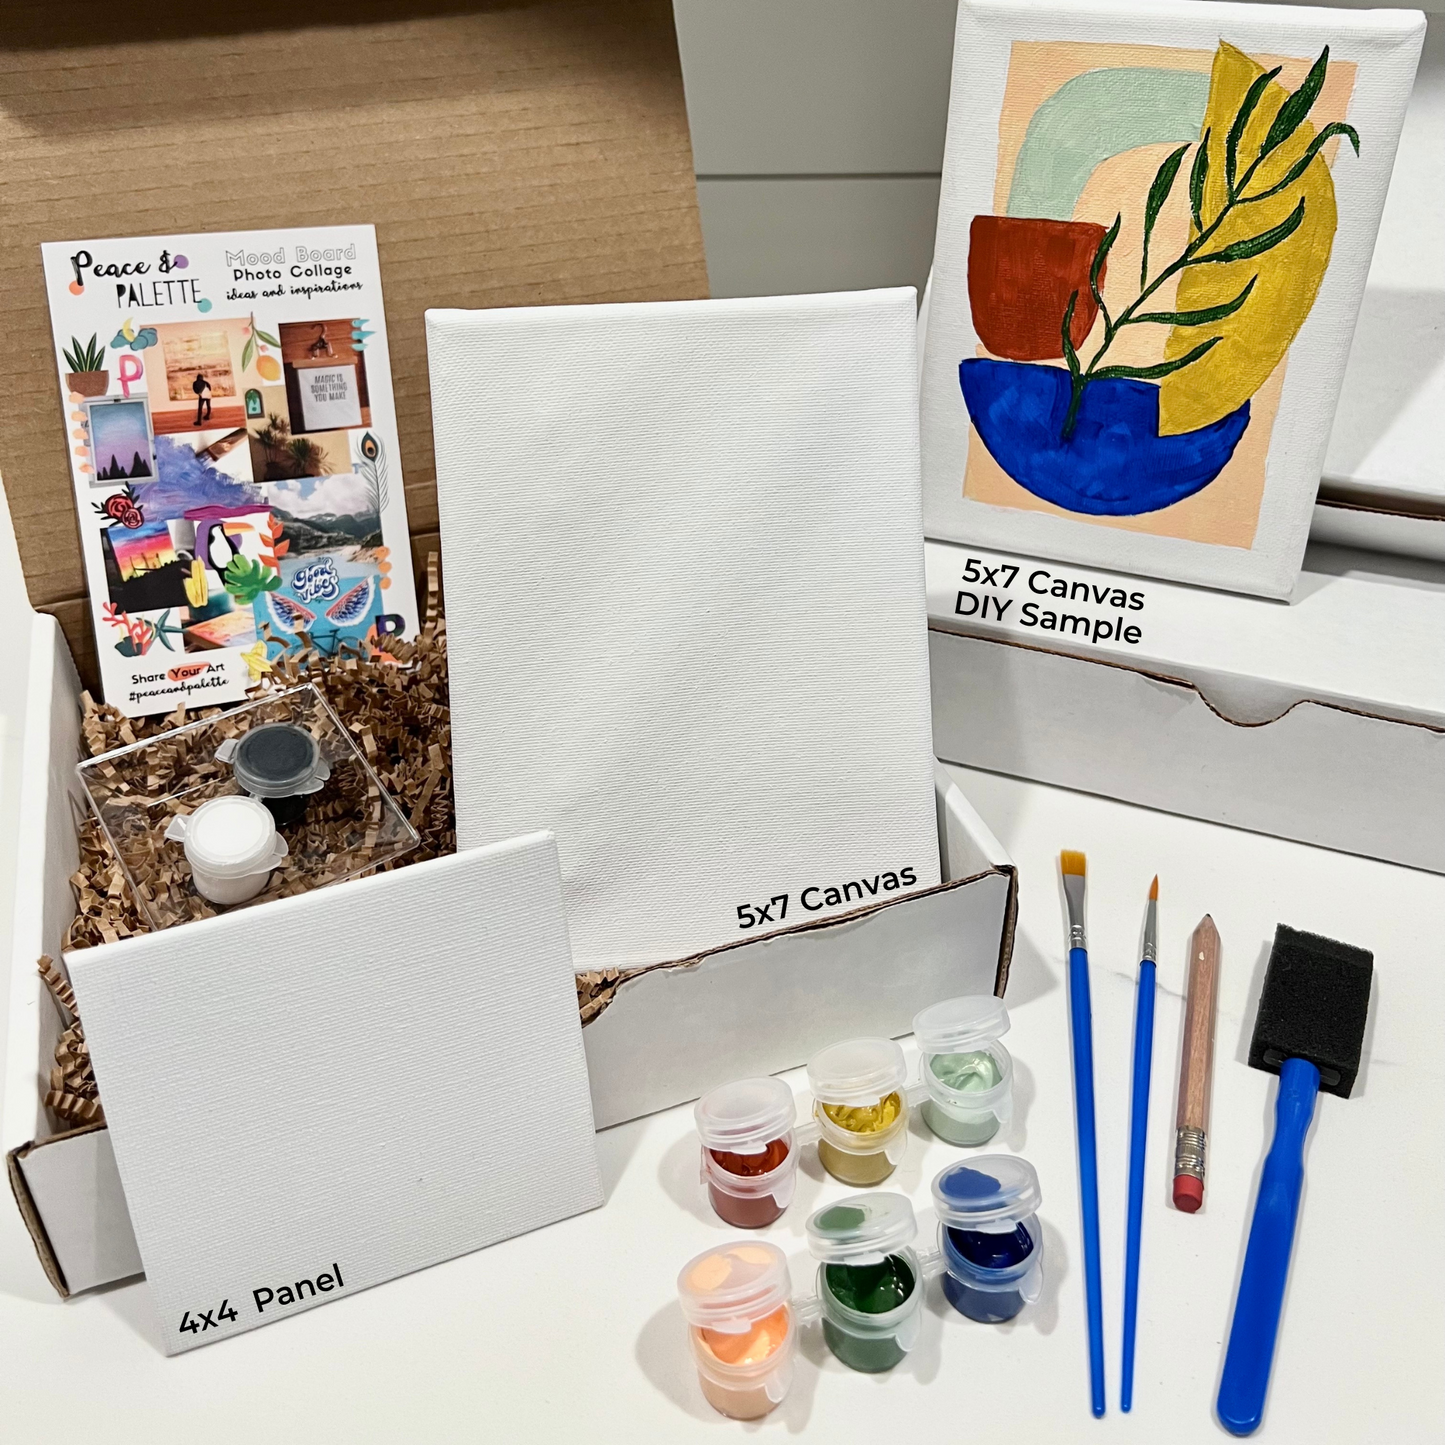 Earthy Oasis collection: 6-color DIY Paint-at-home Craft Kit –  PeaceAndPalette